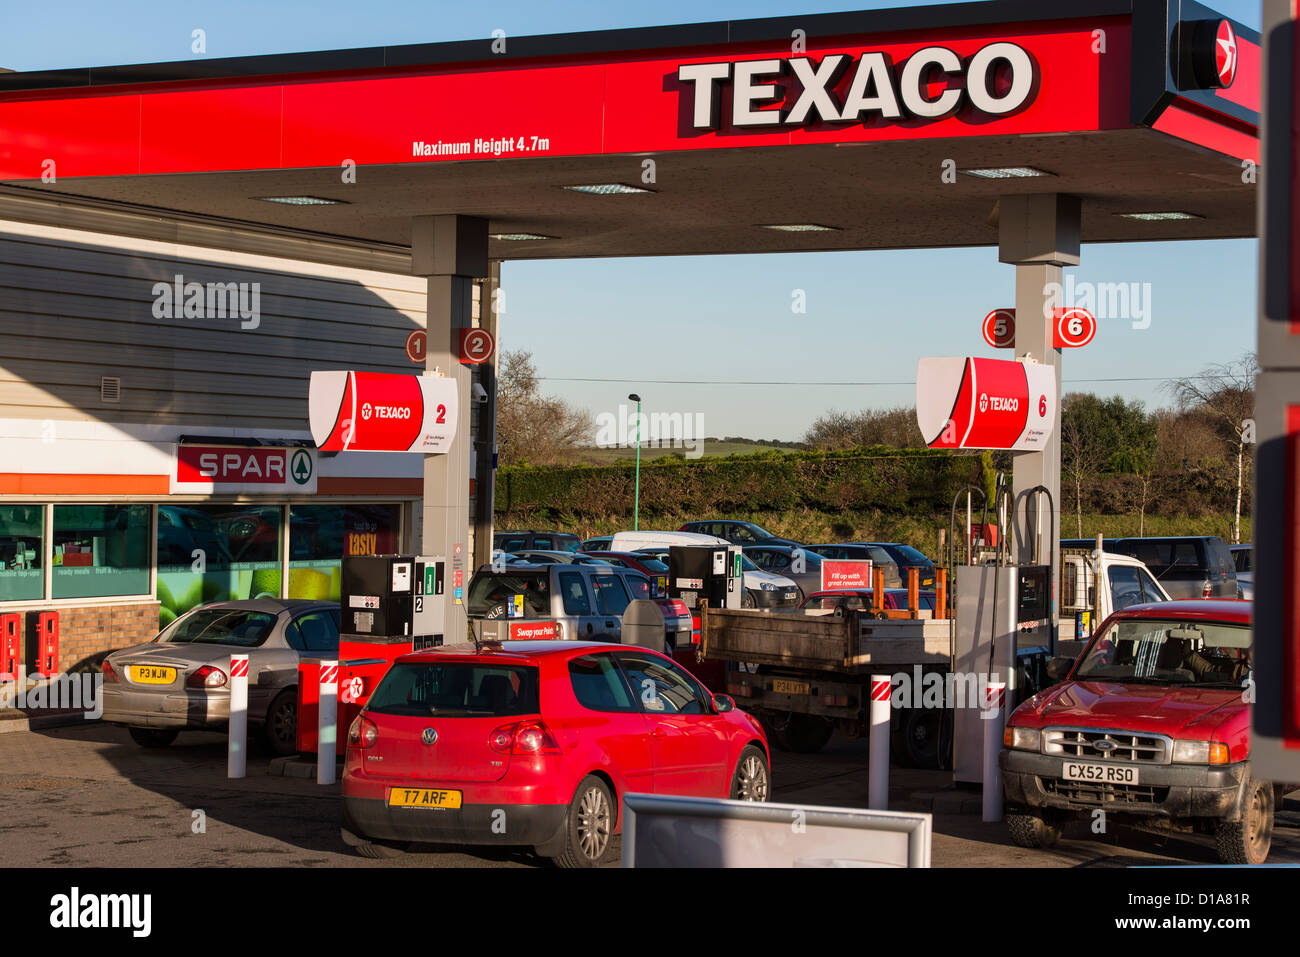 Okehampton, Devon, England.December 10th 2012. Texaco petrol gas station with cars automobiles filling up with petrol or diesel. Stock Photo